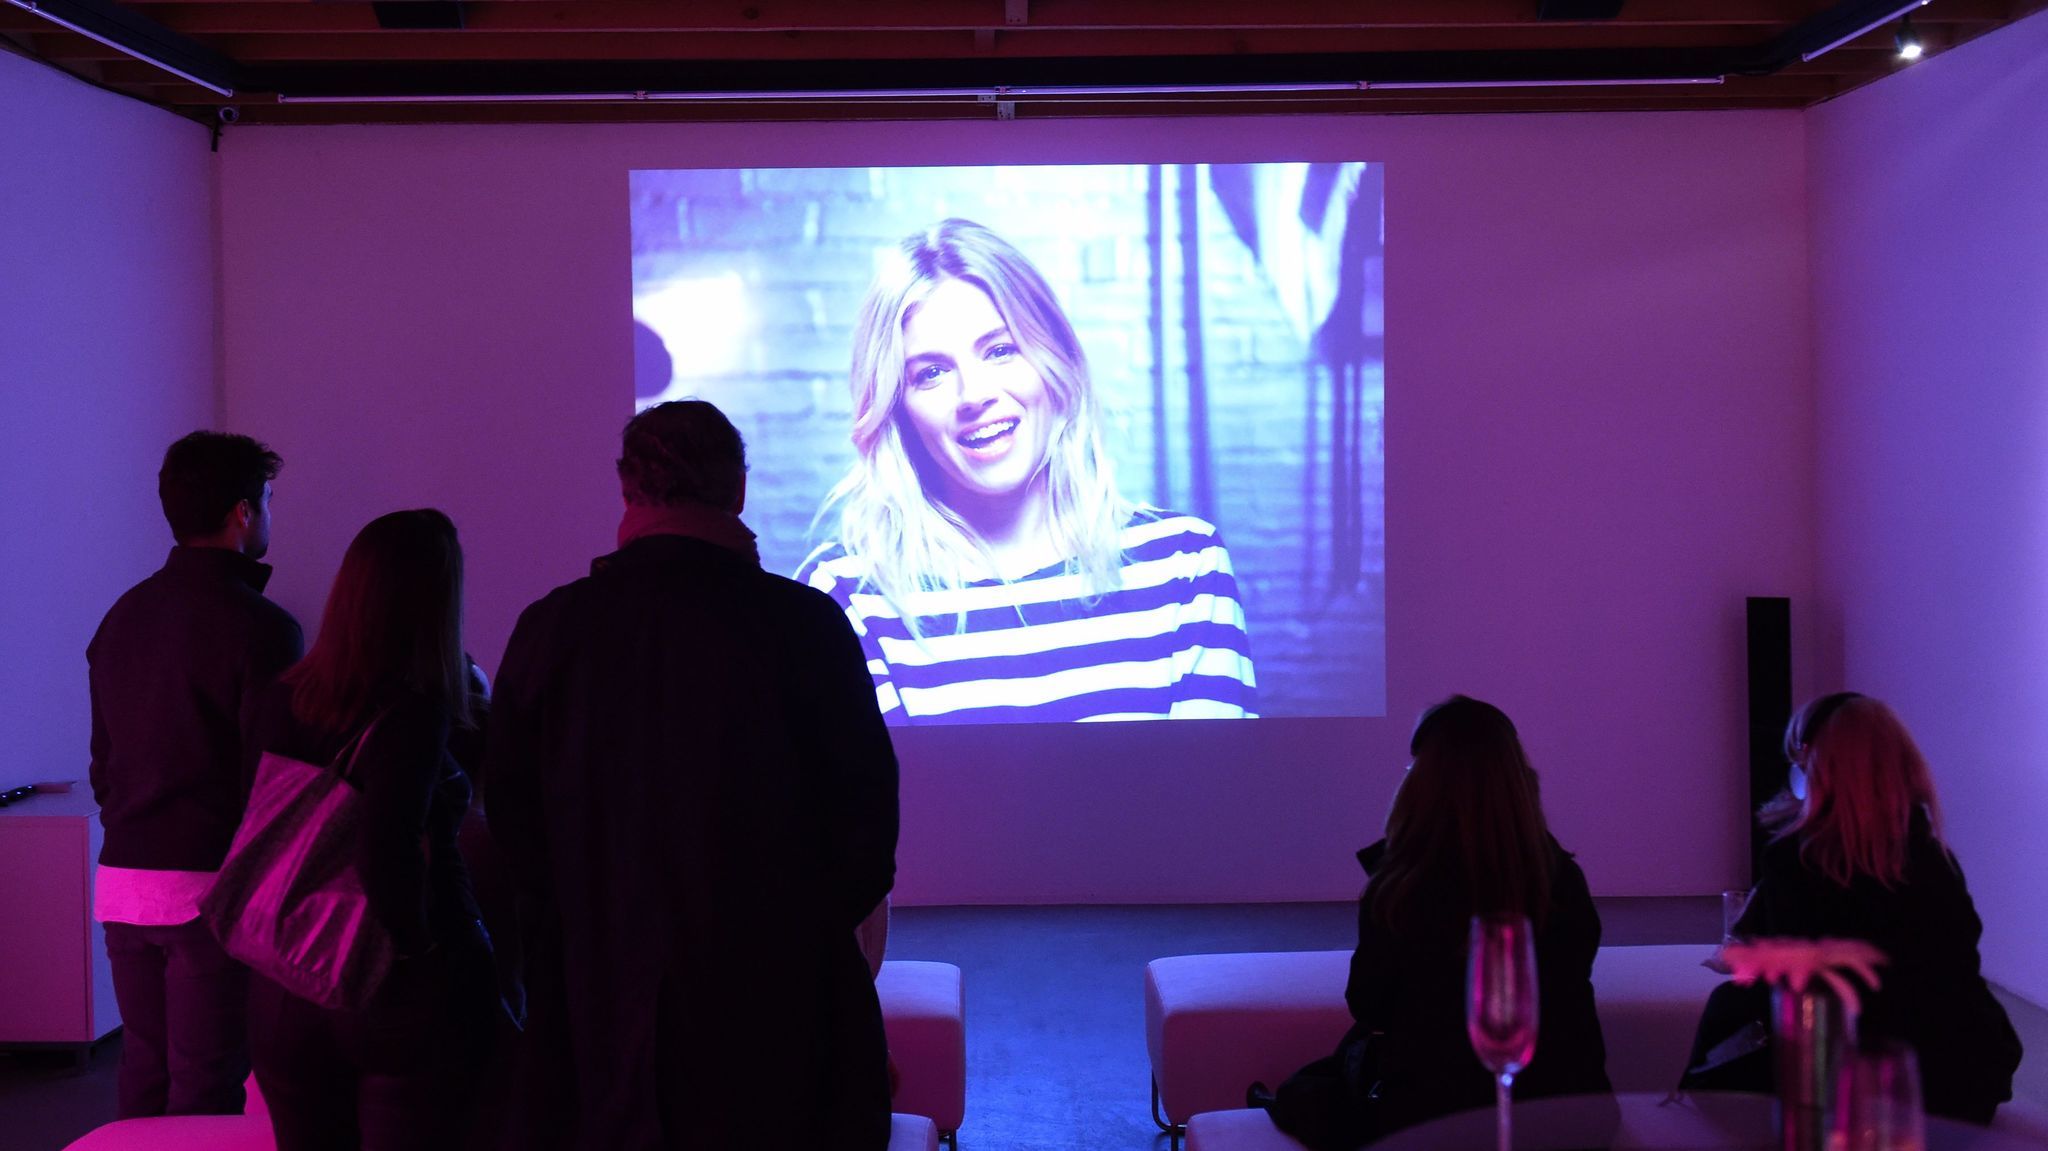 Sienna Miller appears in Chiara Clemente's video, photographed here during the preview party last week.